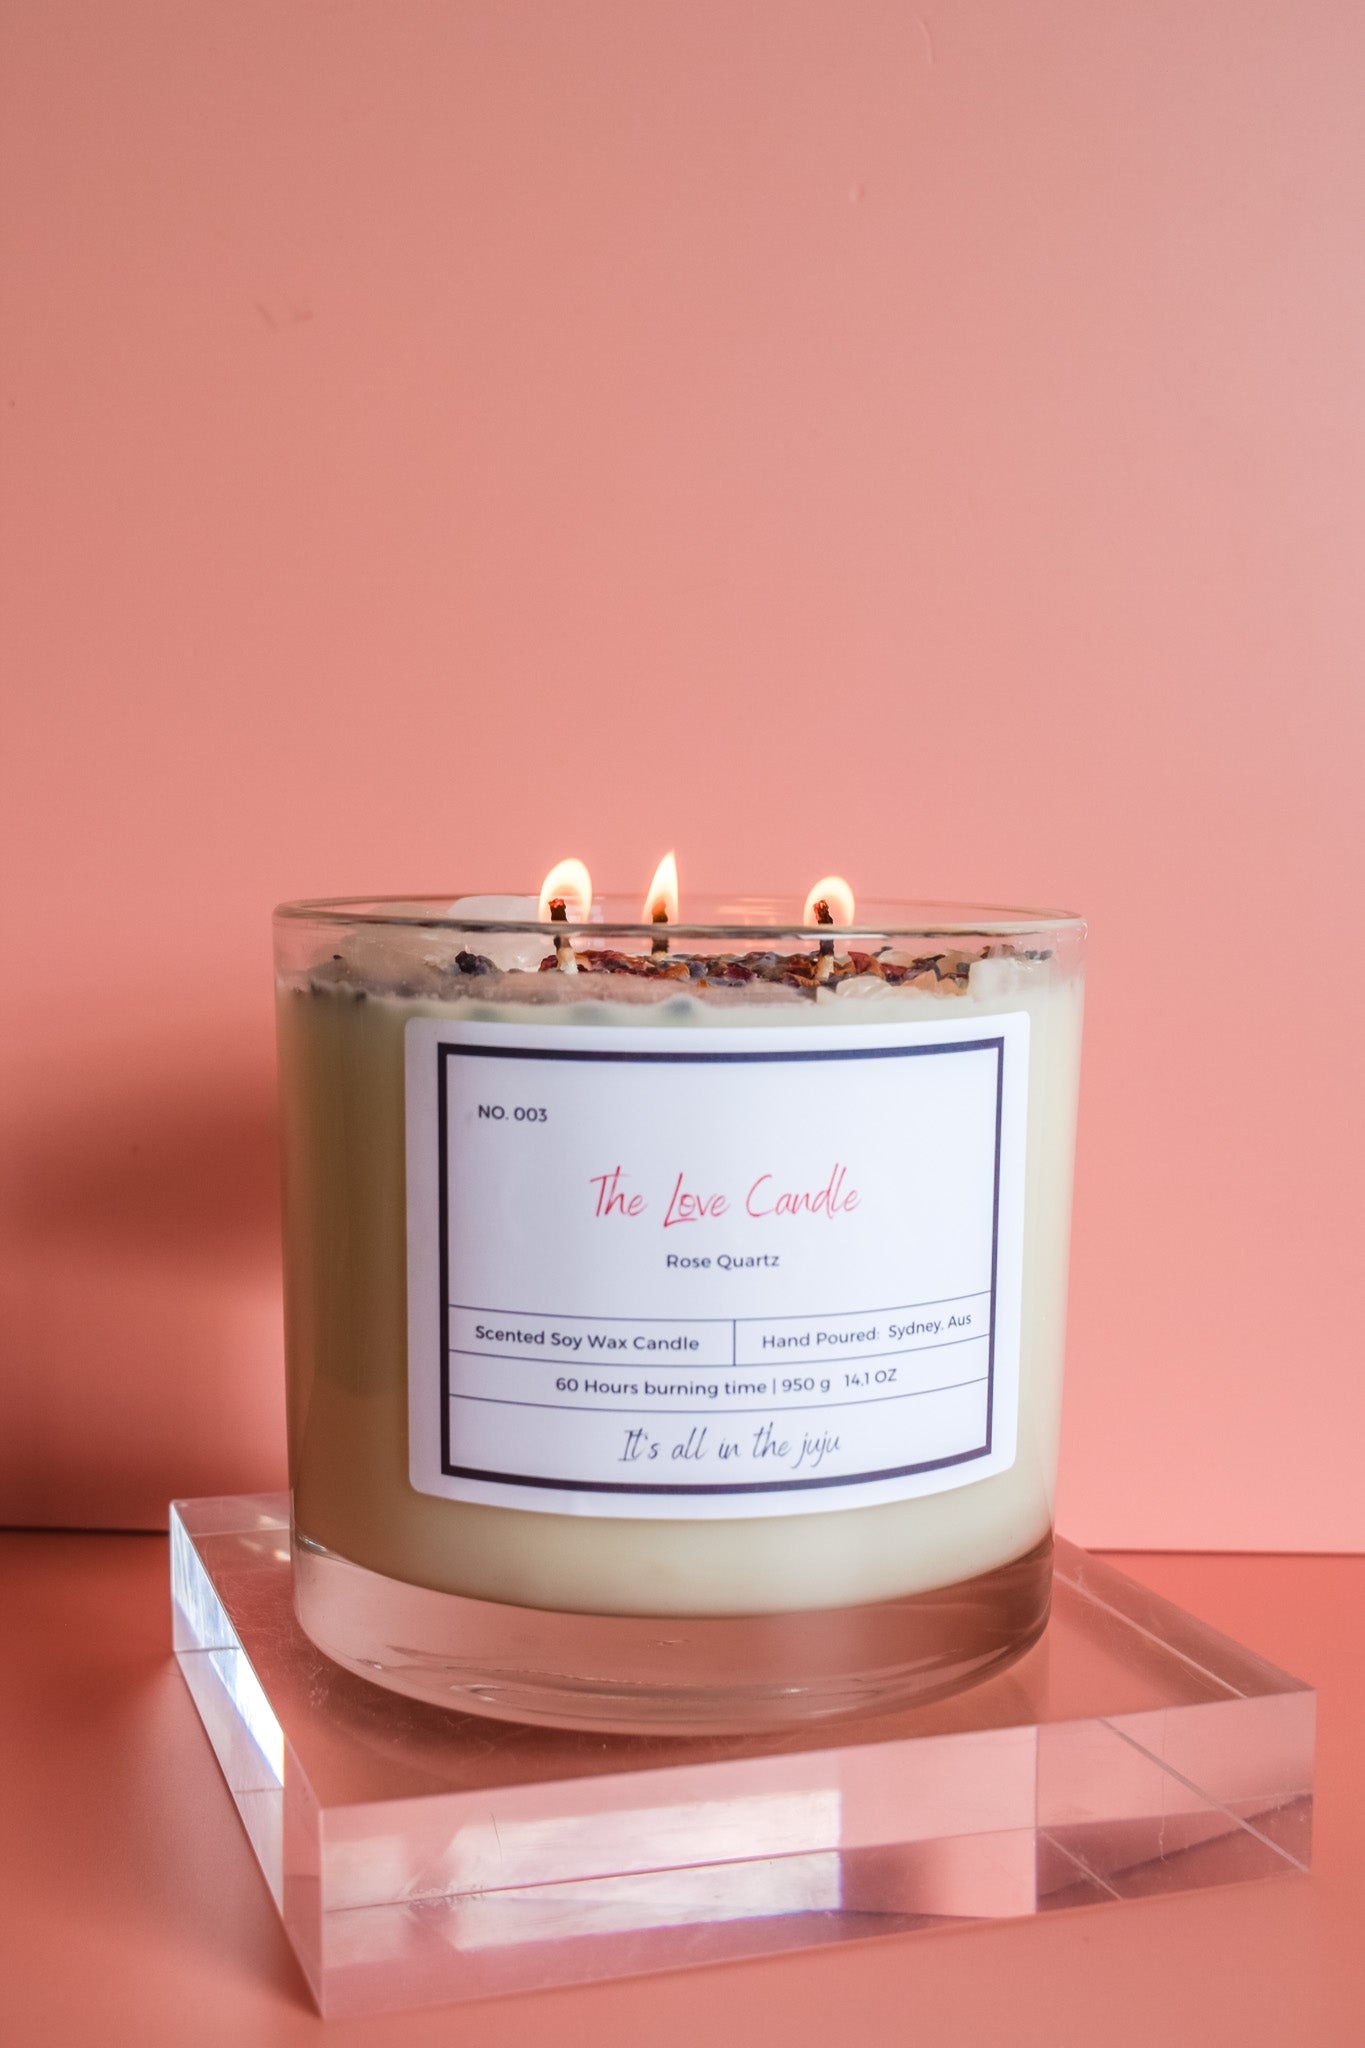 Crystal & Botanical Scented Candle Rose Quartz ~ Balance the physical heart with lov - Wands of Lust Co